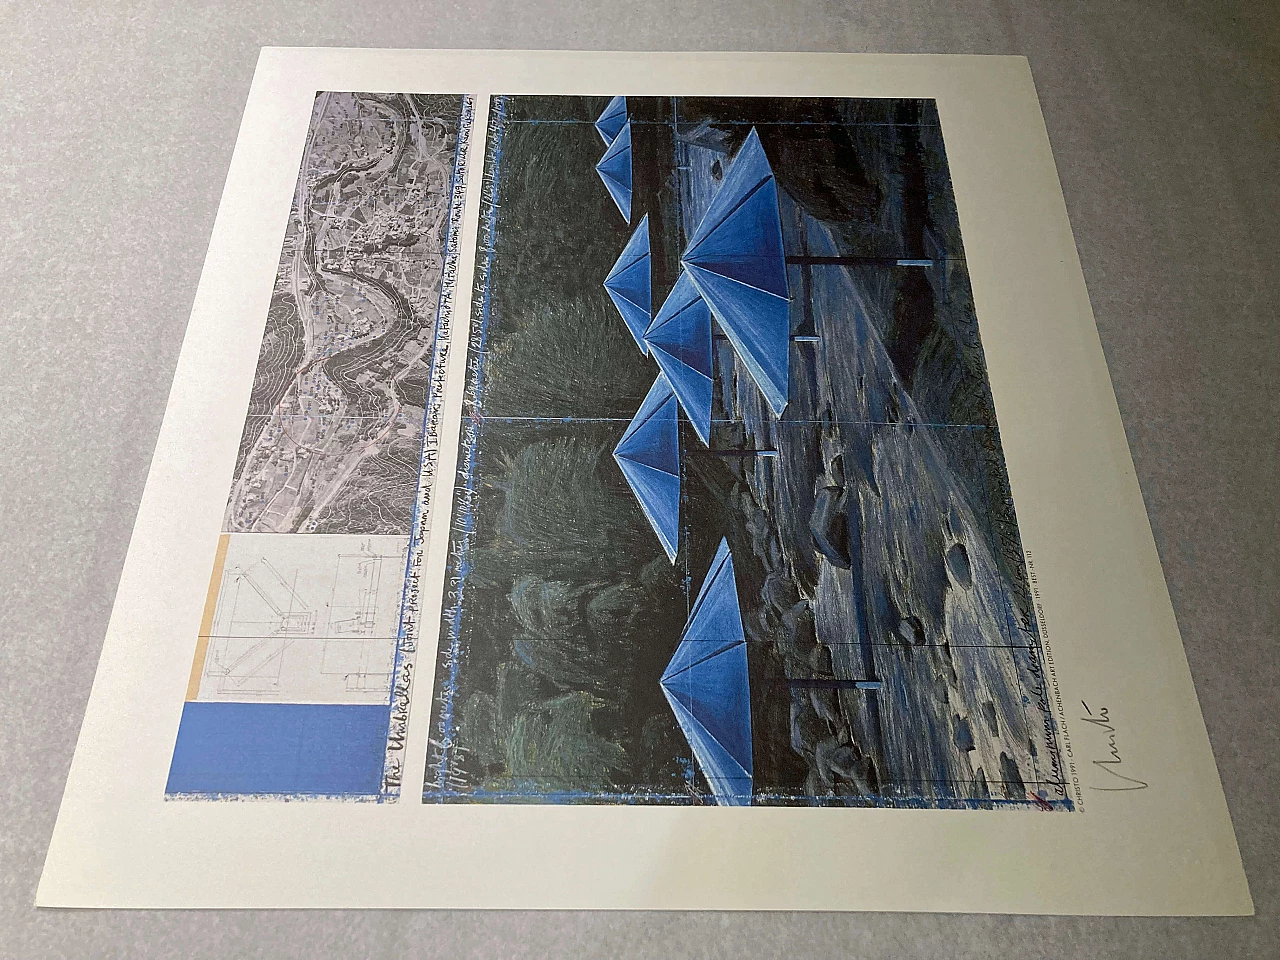 Christo, The Umbrellas - Joint Project for Japan and USA, lithograph, 1991 19